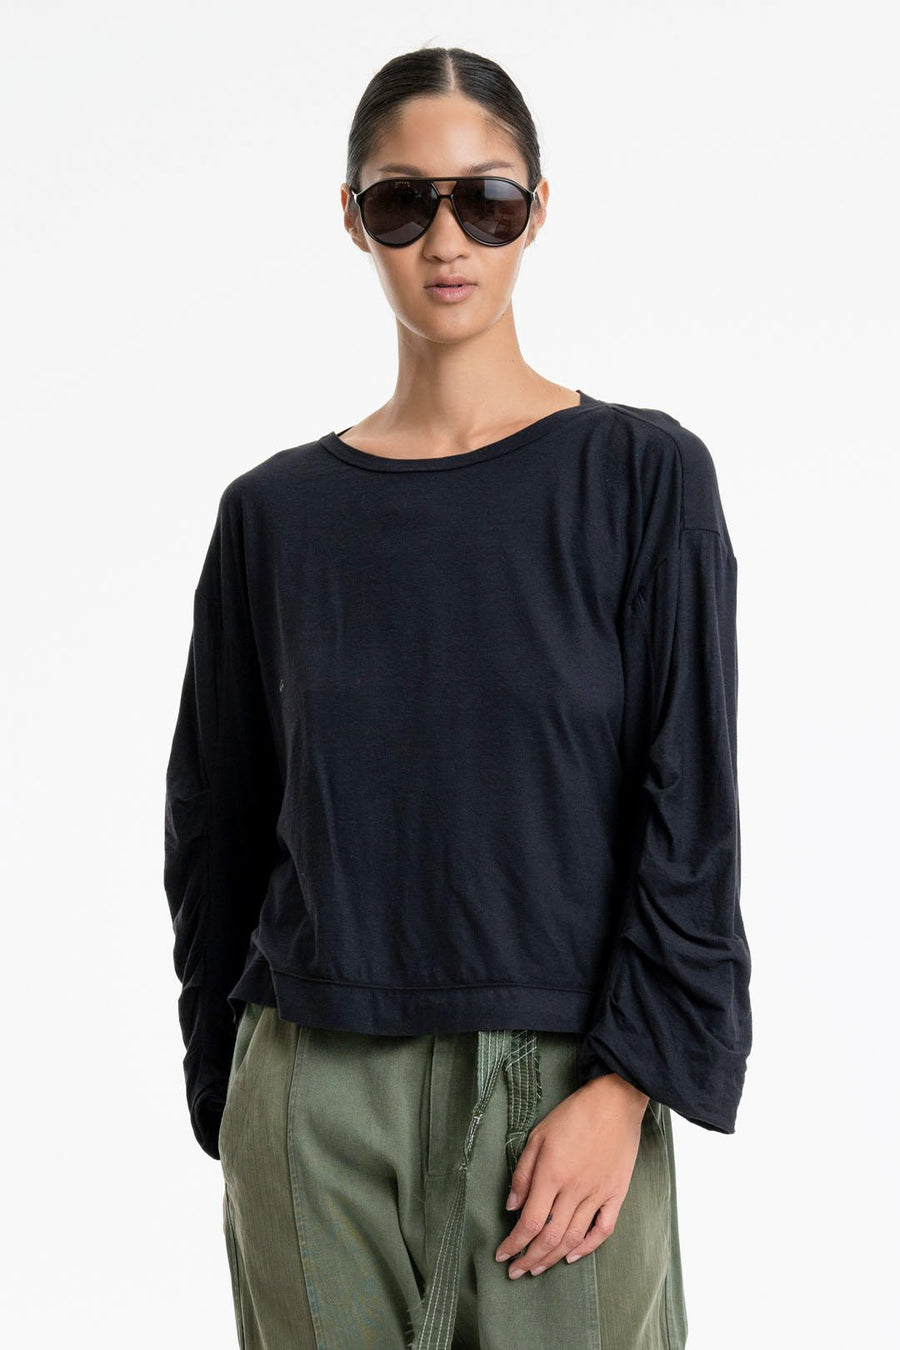 P.C.H. ROUCHED SLEEVE SHIRT, BLACK - Burning Torch Online Boutique